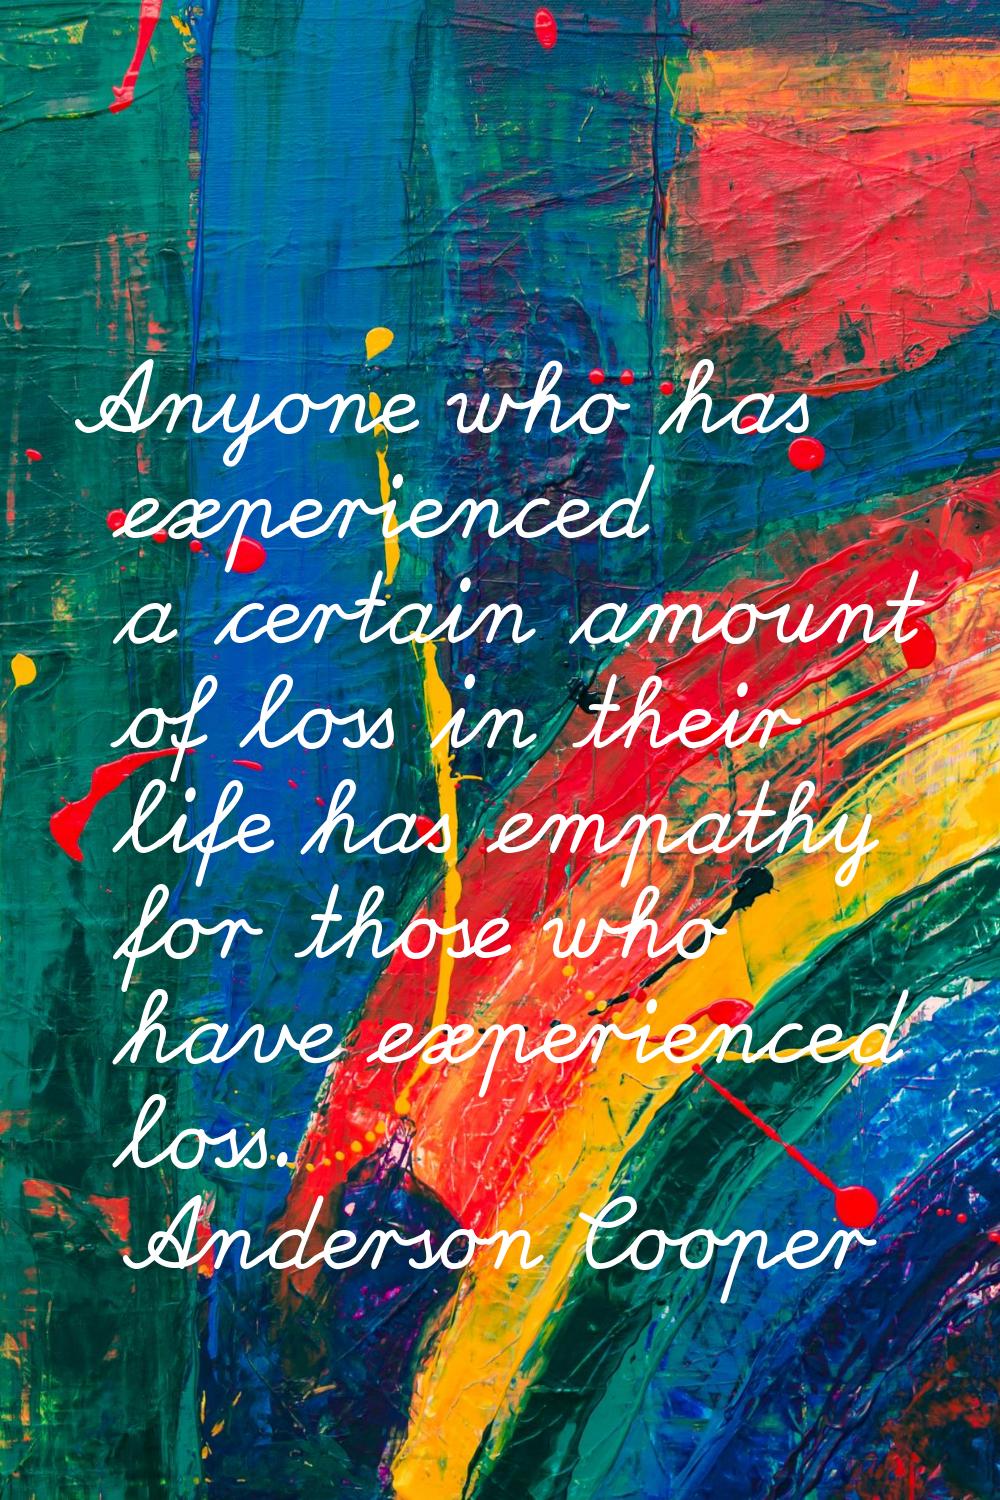 Anyone who has experienced a certain amount of loss in their life has empathy for those who have ex